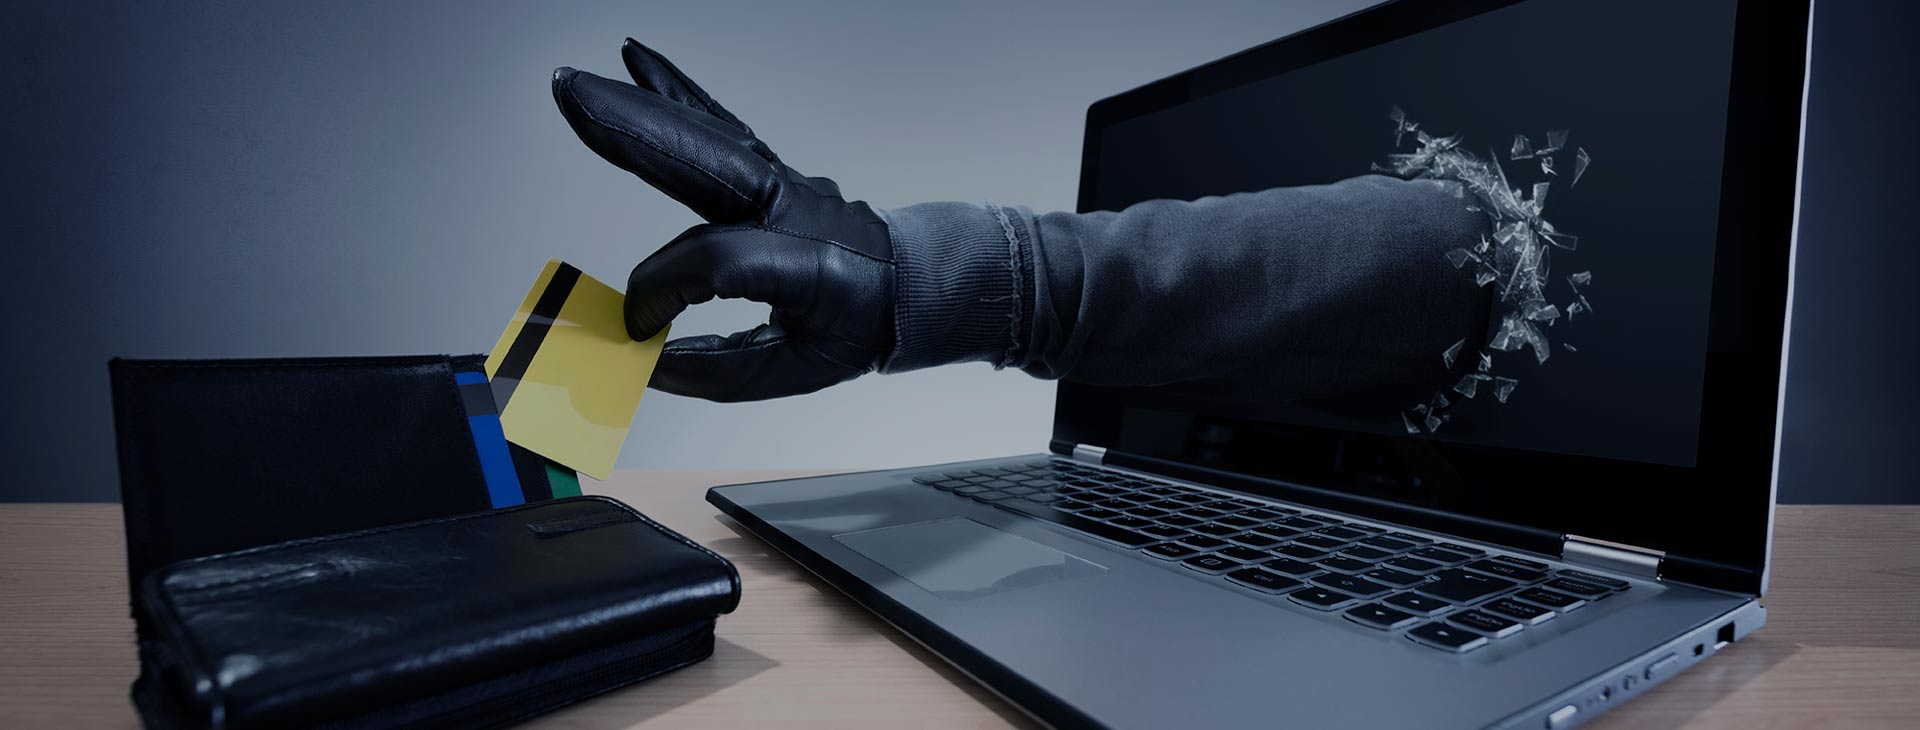 gloved-hand-coming-out-of-computer-to-steal-credit-card-information